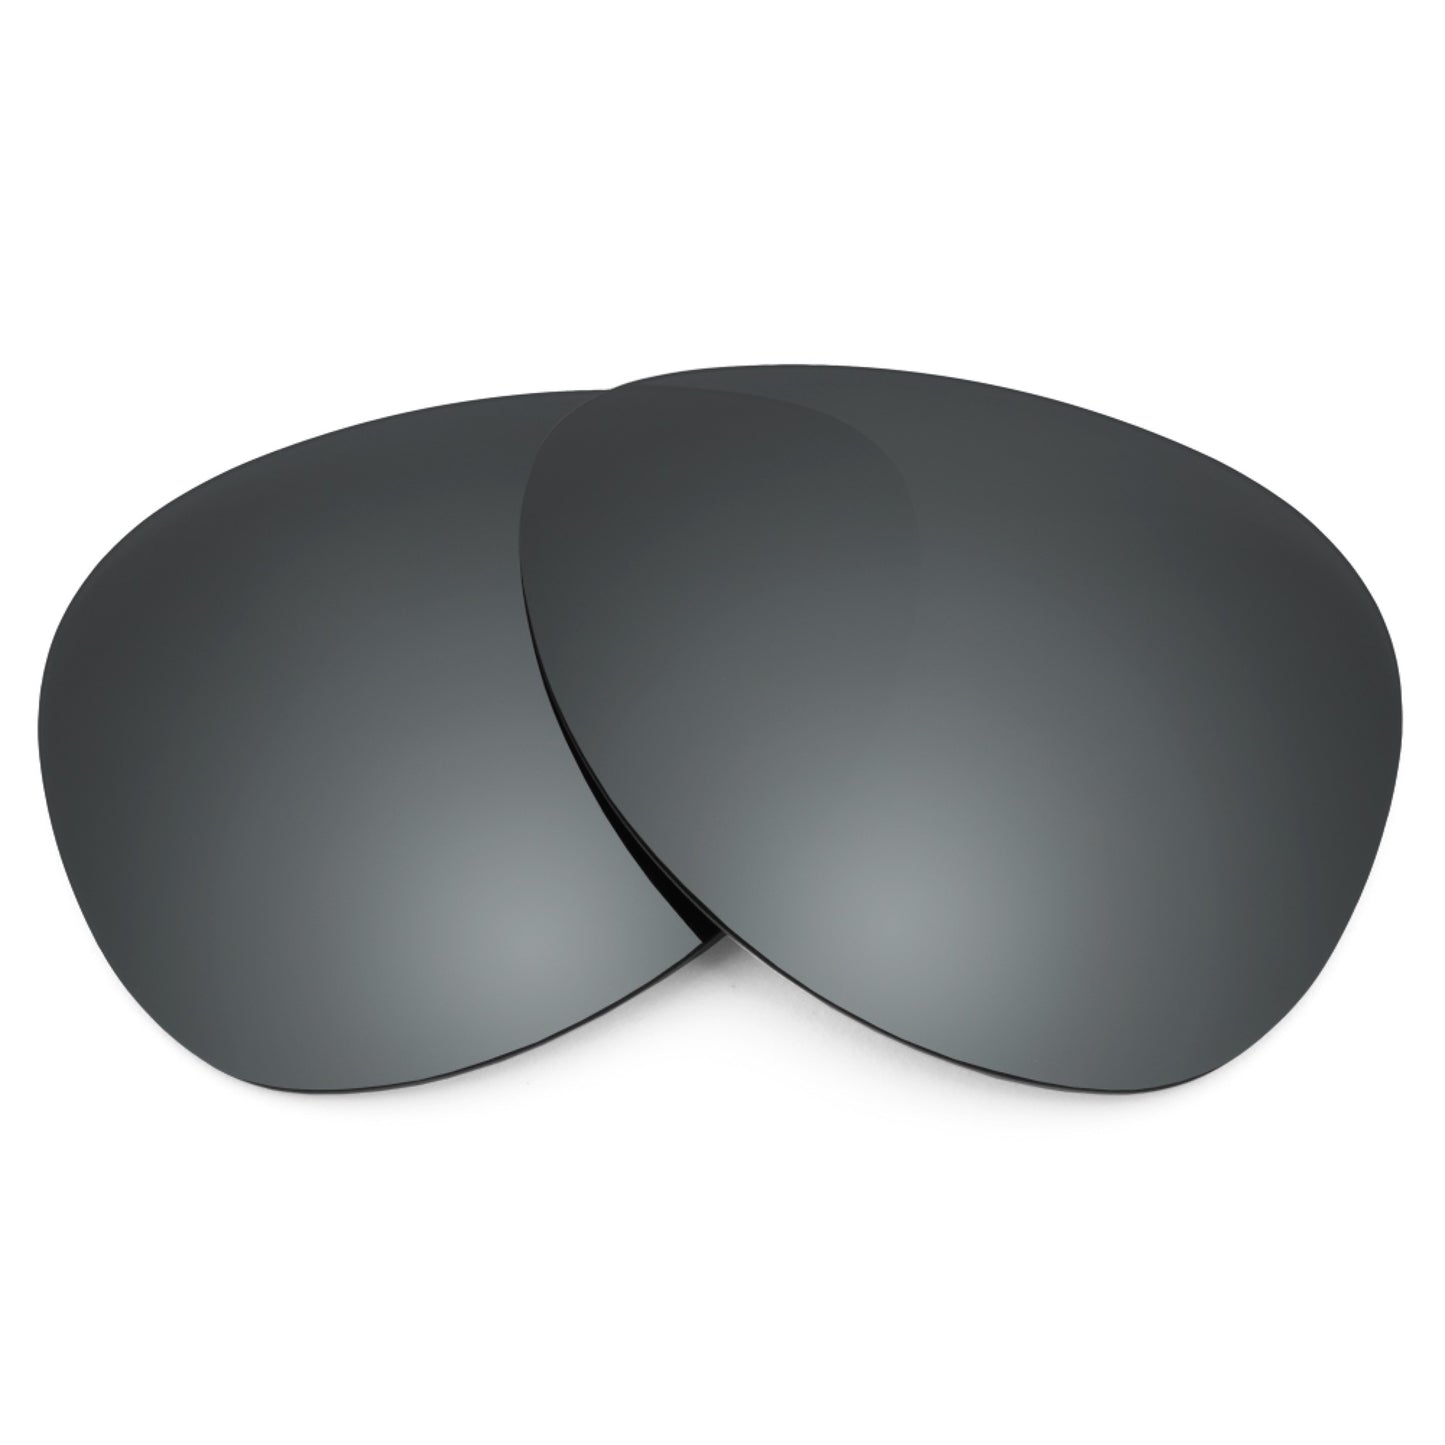 Revant replacement lenses for Ray-Ban RB4189 64mm Non-Polarized Black Chrome